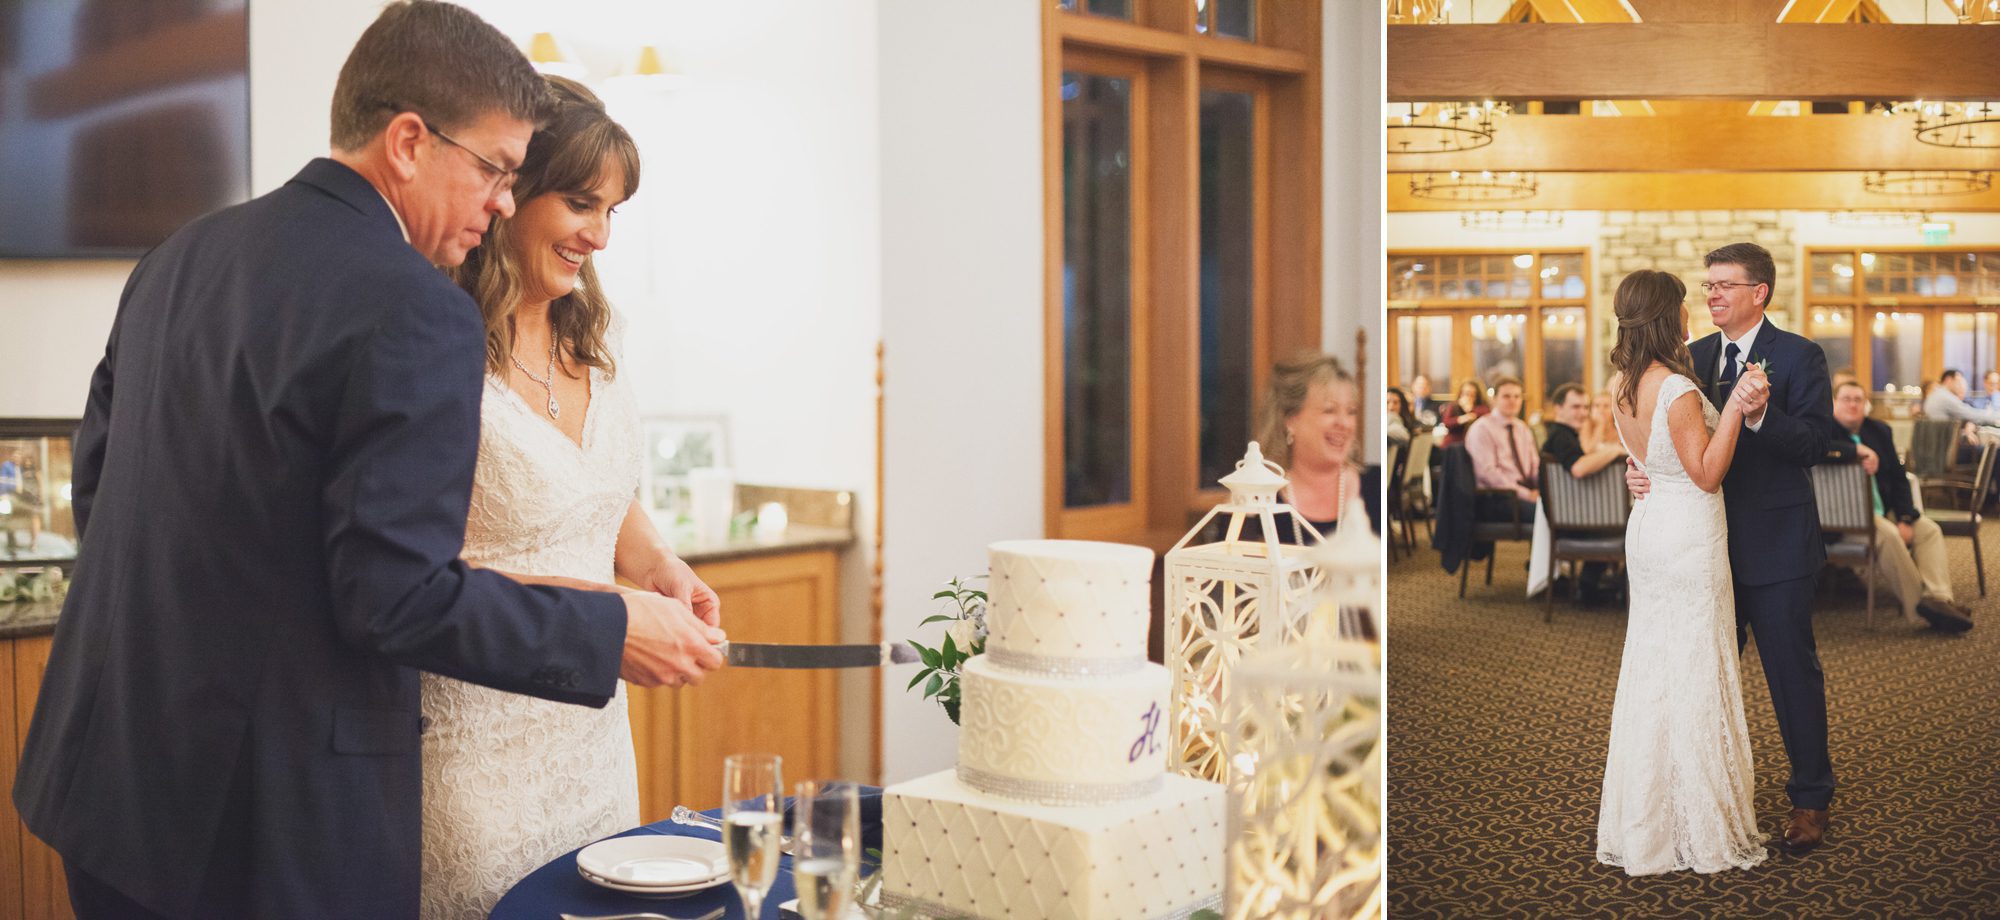 Bride and groom cutting cake after wedding ceremony in clubhouse. Winter wedding at Vanderbilt Legends Golf Course in Brentwood TN, photos by Krista Lee Photography